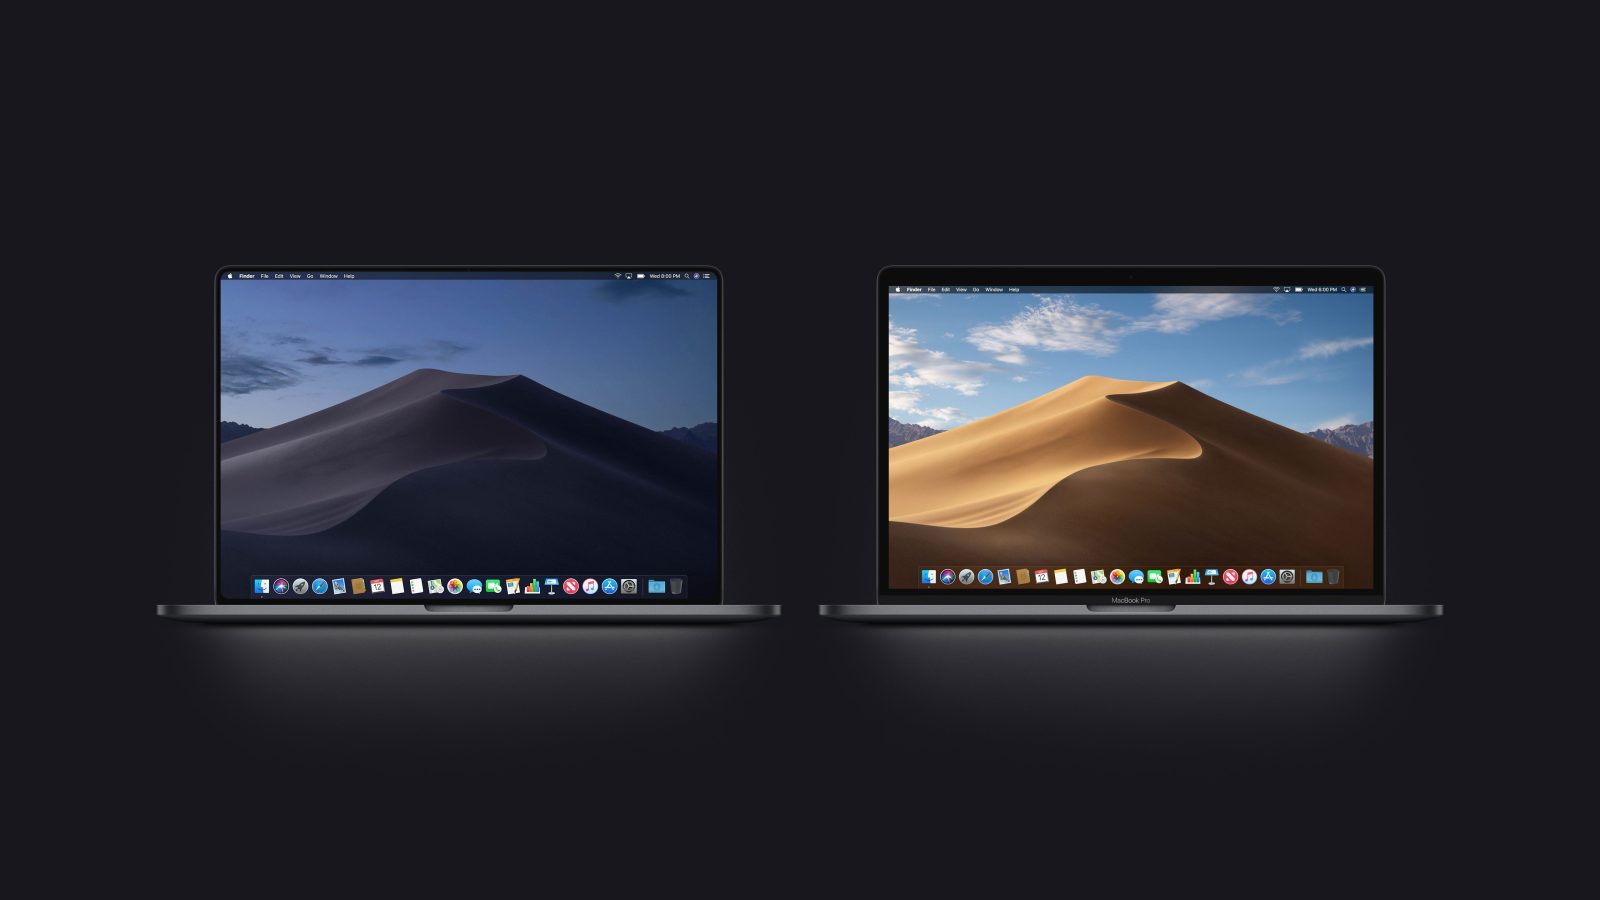 New 16 Inch Macbook Pro Rumored To Launch In Fall With 3072x19 Display Spec Bump Refresh For Macbook Air 9to5mac